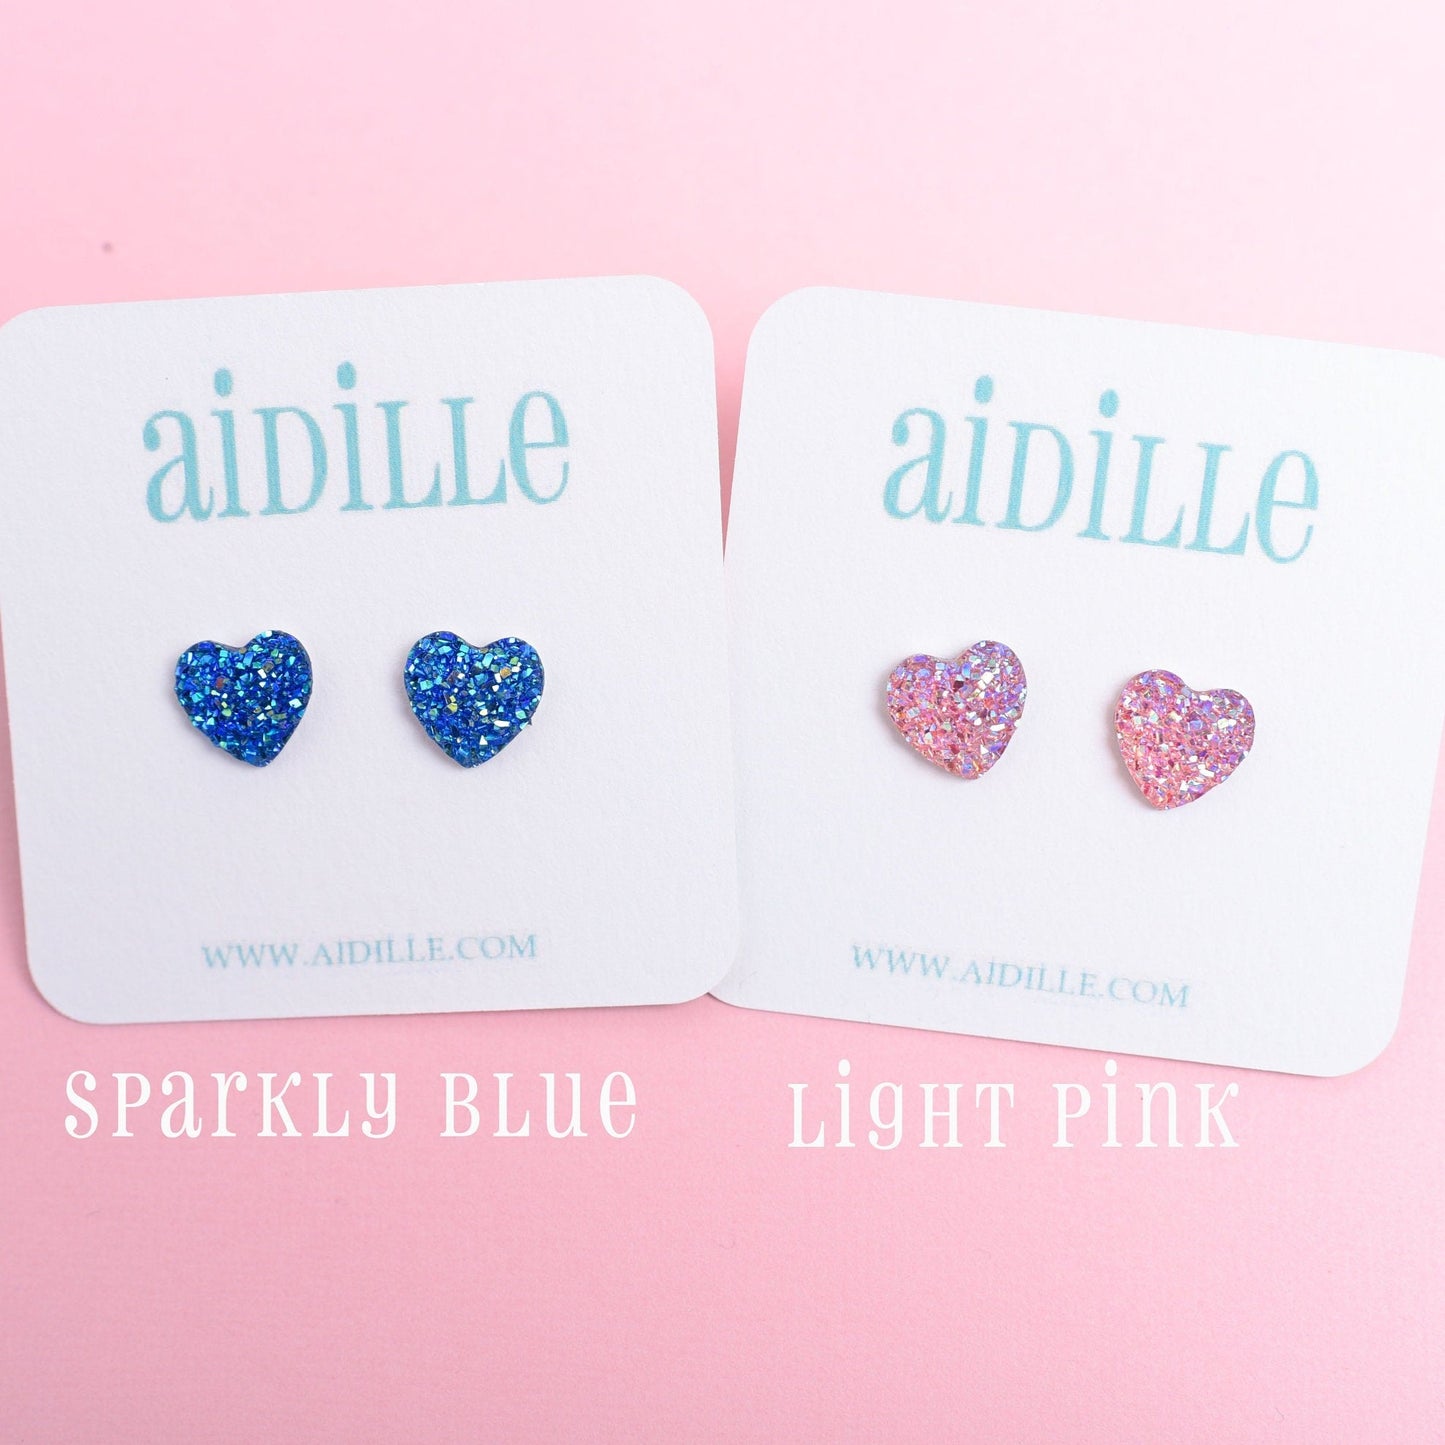 Sparkly Druzy 12mm Heart Earrings in Rainbow Colors with Titanium Posts